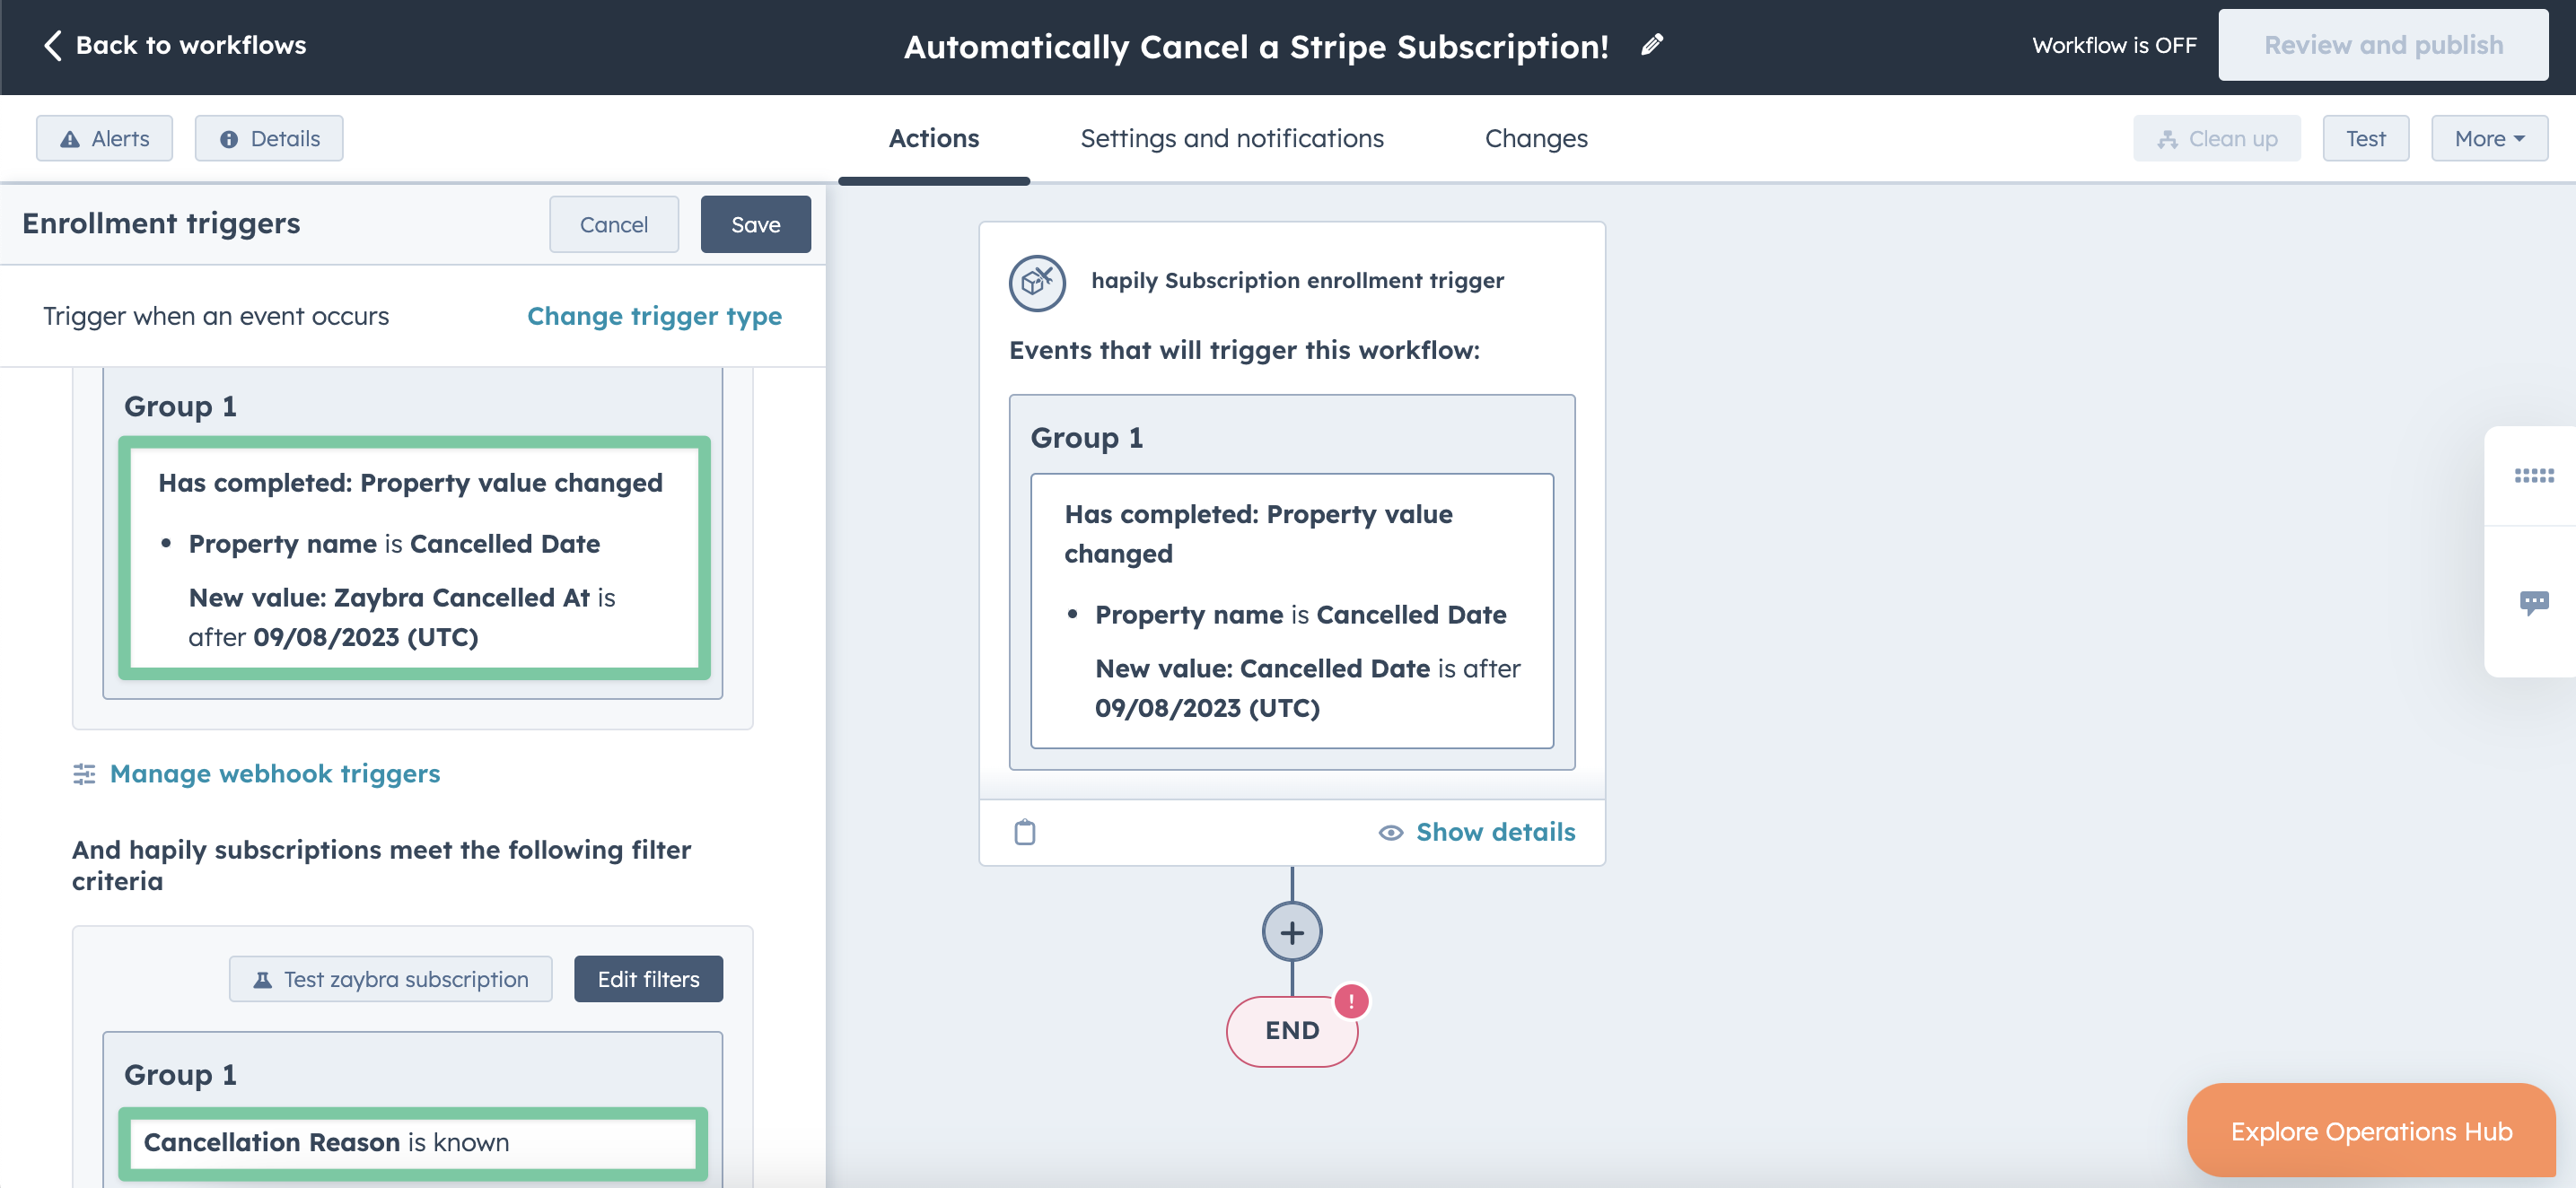 HubSpot how to cancel a stripe subscription using workflows